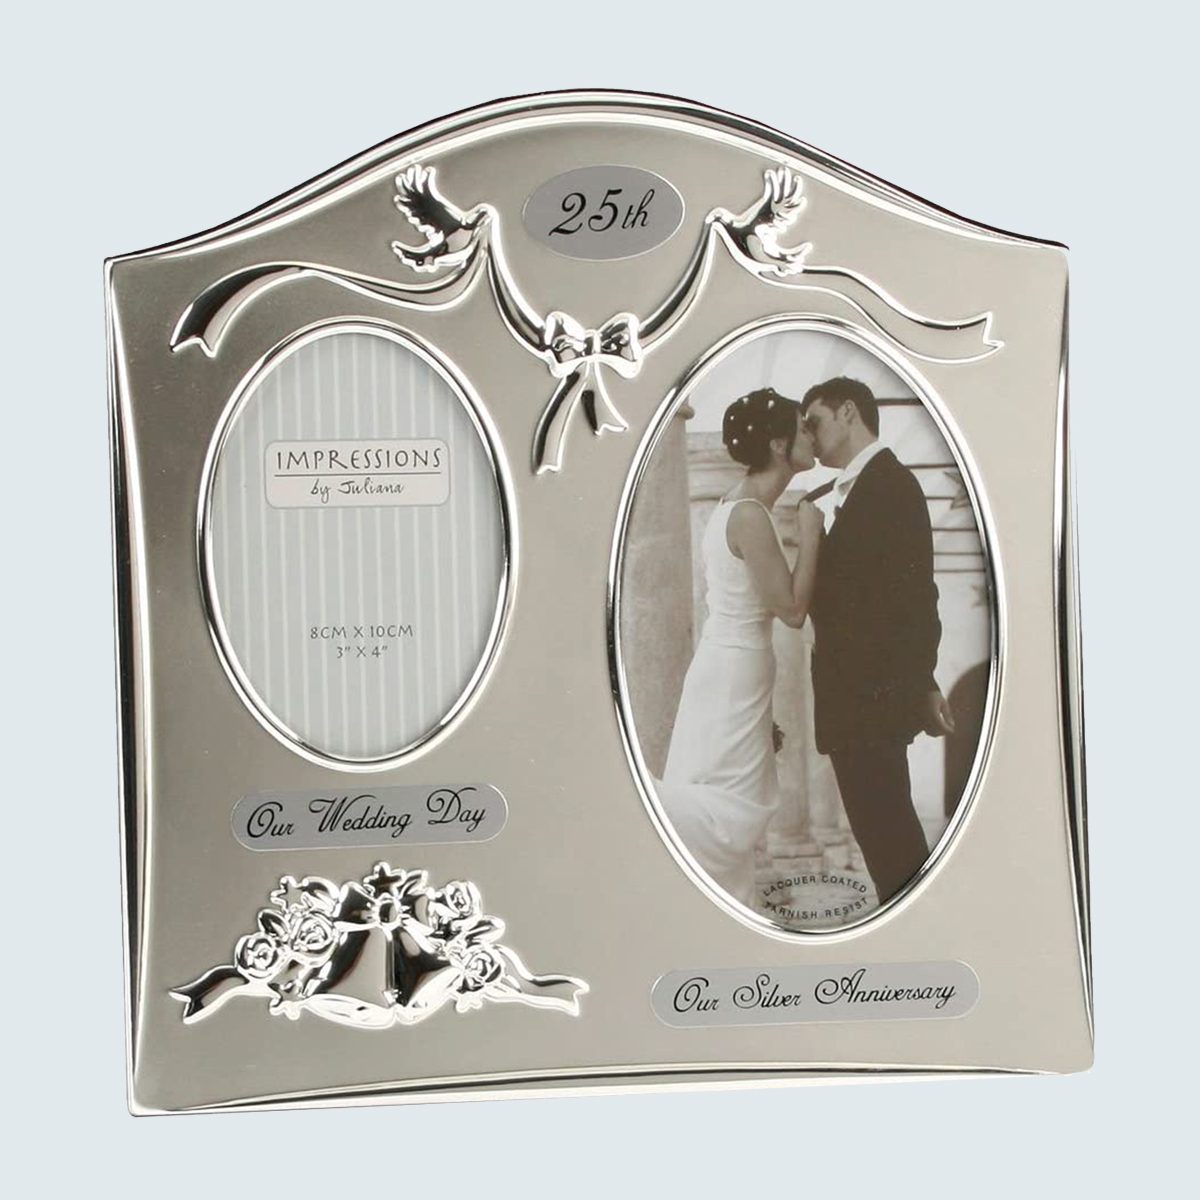 Best Selling Anniversary Gifts Online  Popular Wedding Anniversary Gifts  for Couple